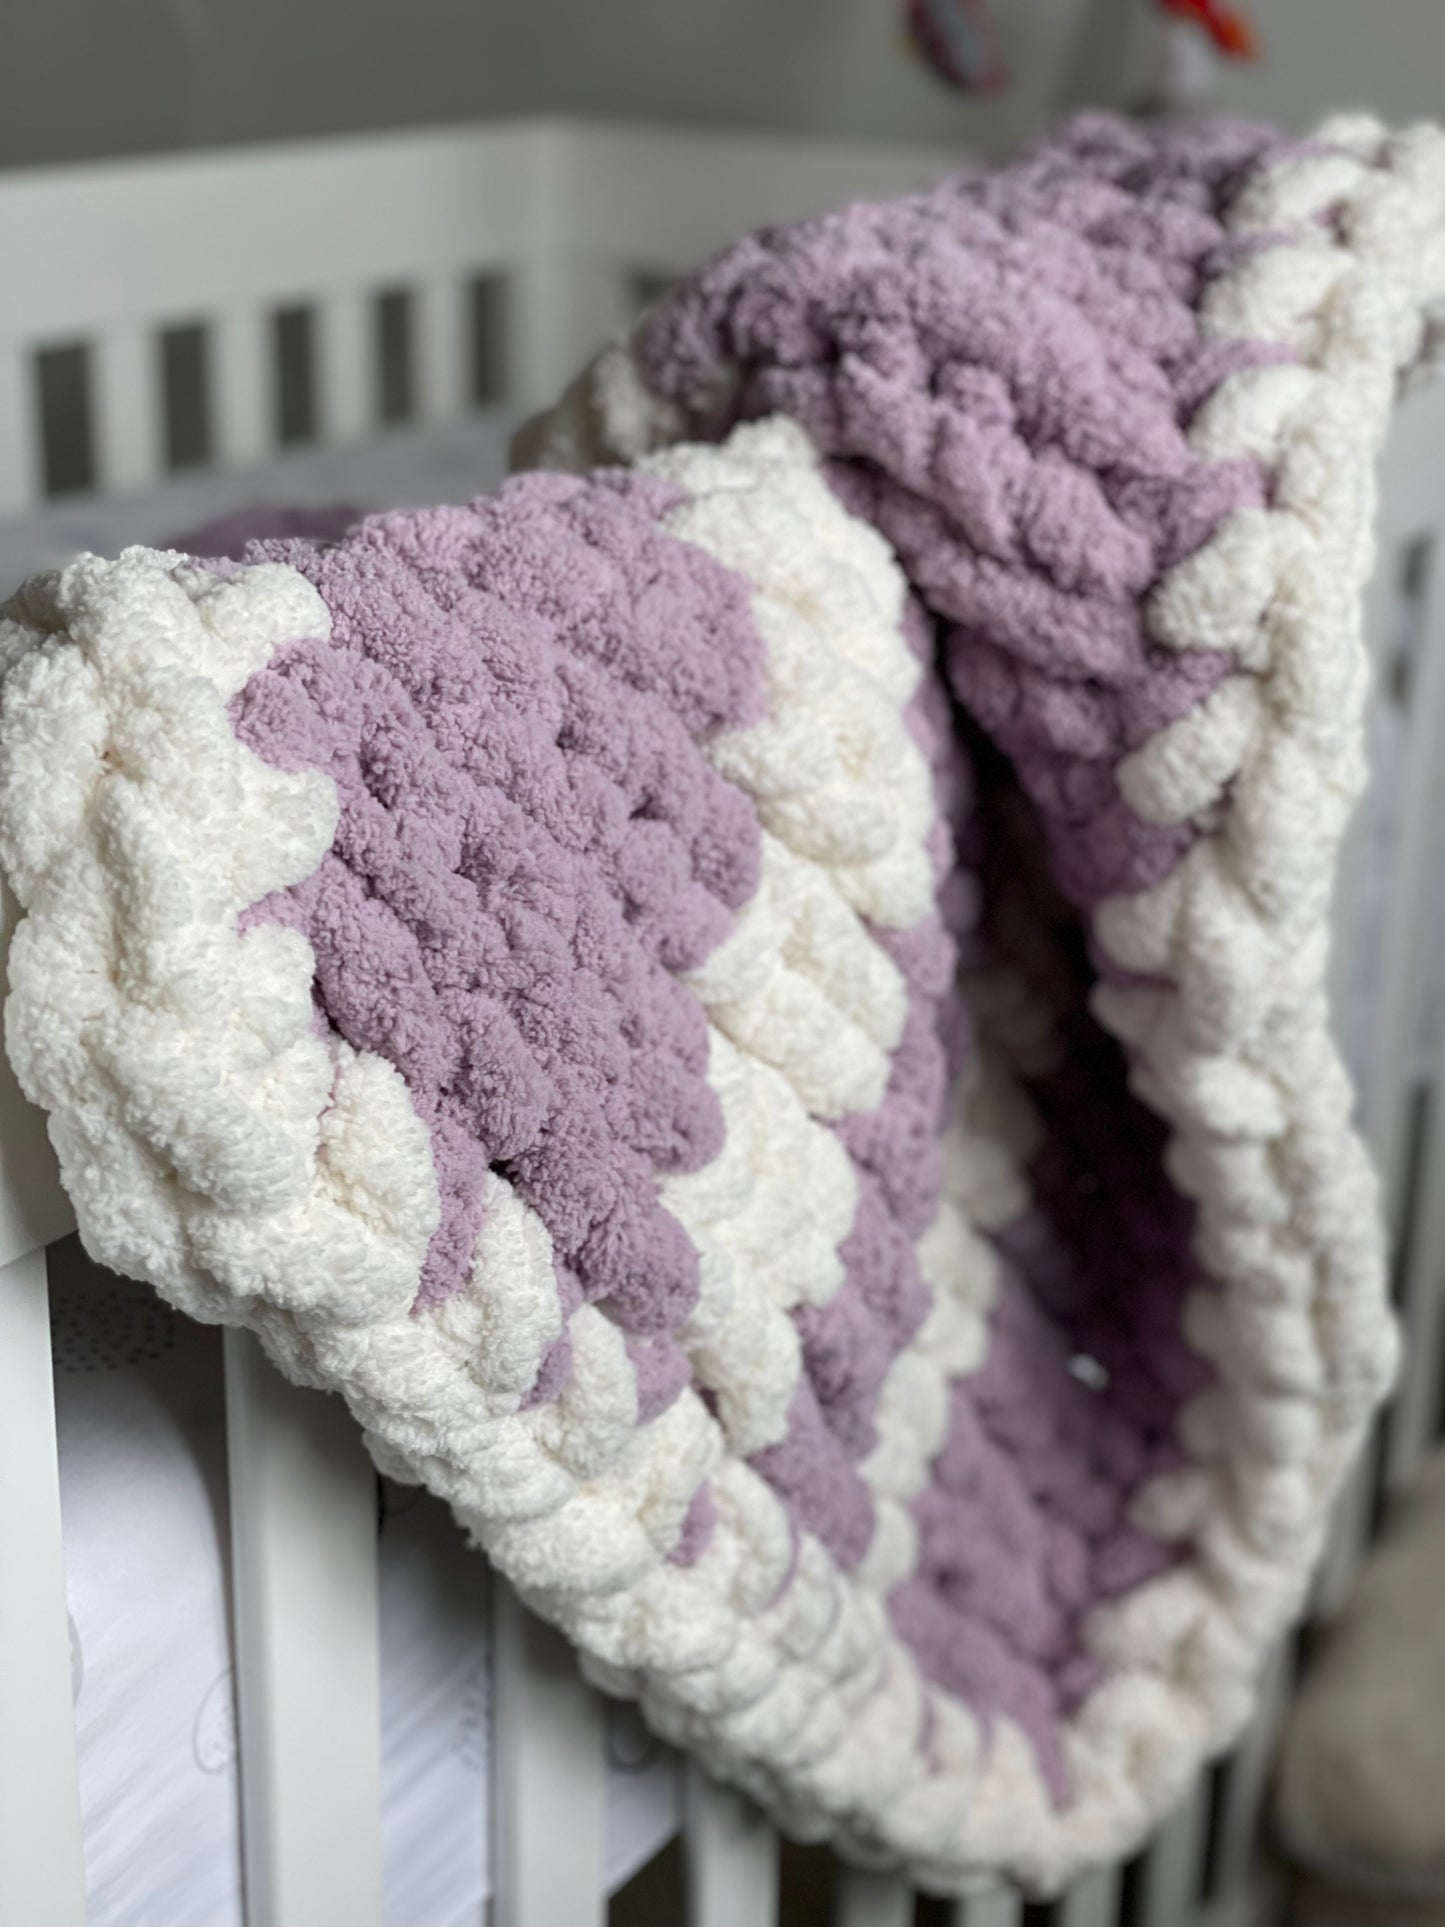 Healing Hand, Chunky Knit Baby Blankets - Lavender Purple & White Stripe with a white edge